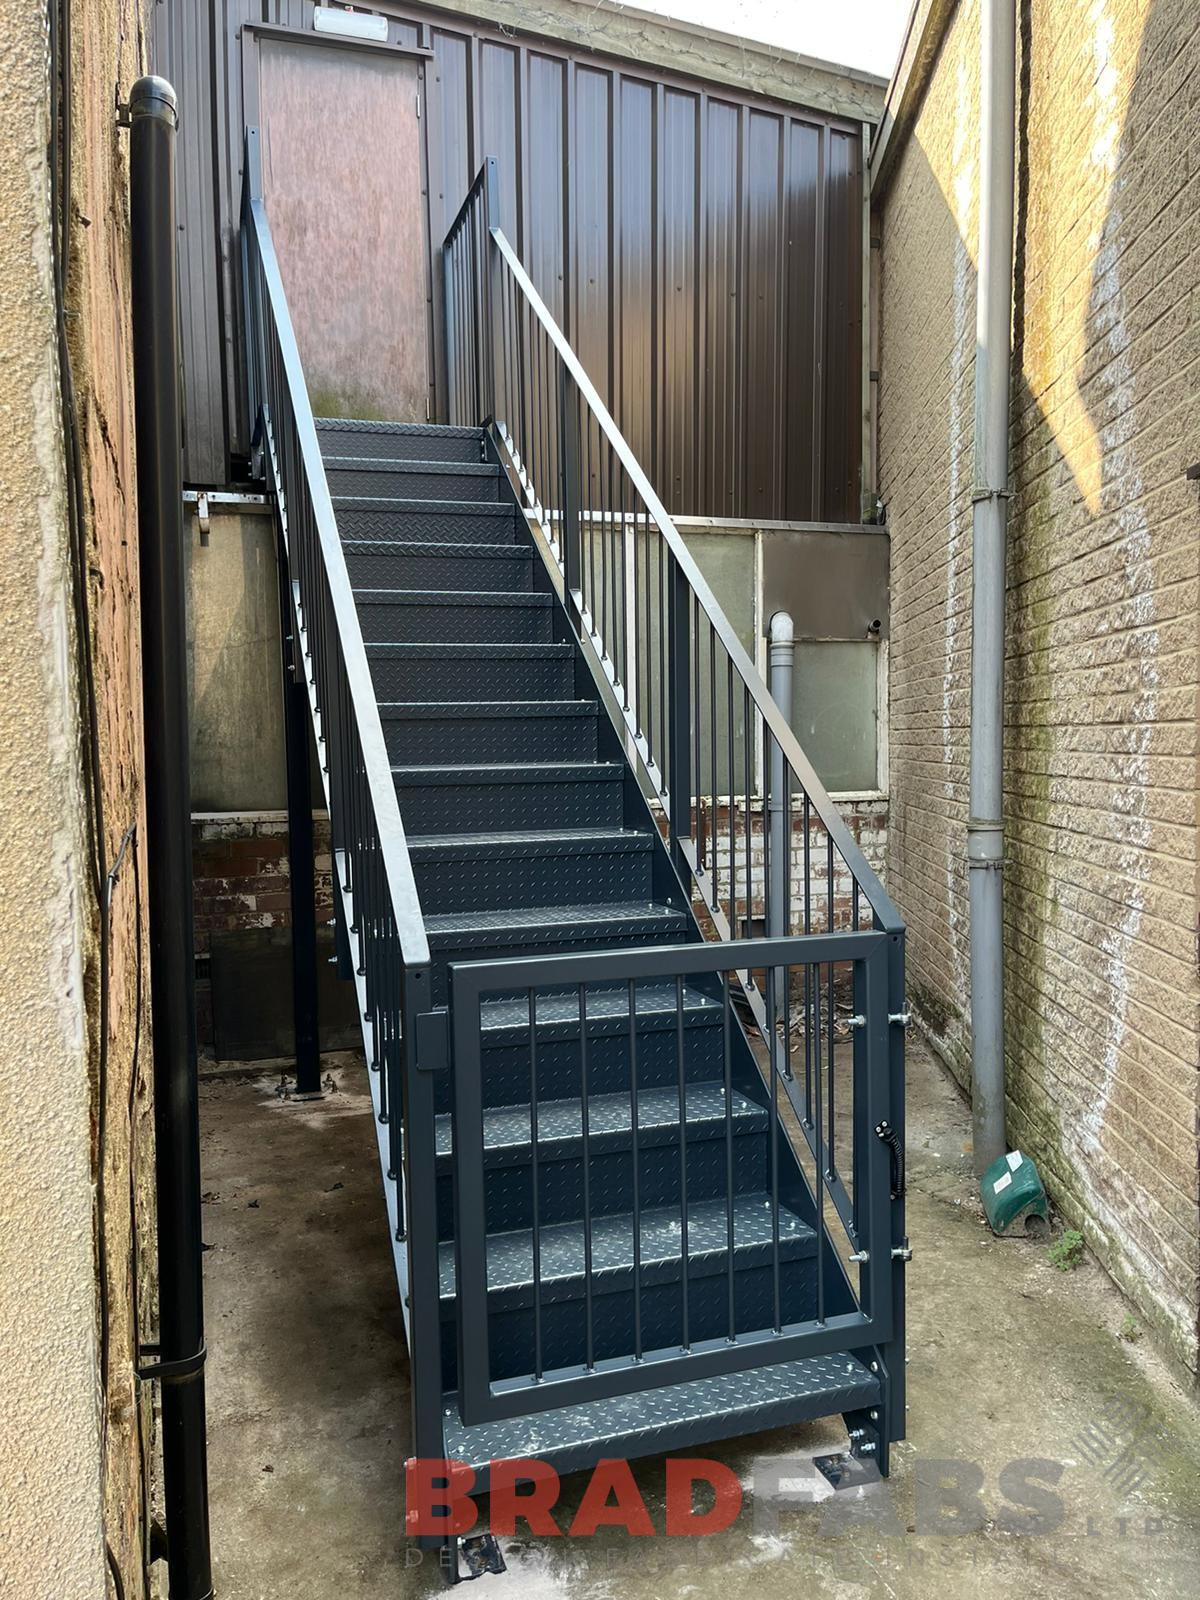 Bradfabs, external staircase, staircase with gate, durbar treads, steel stairs